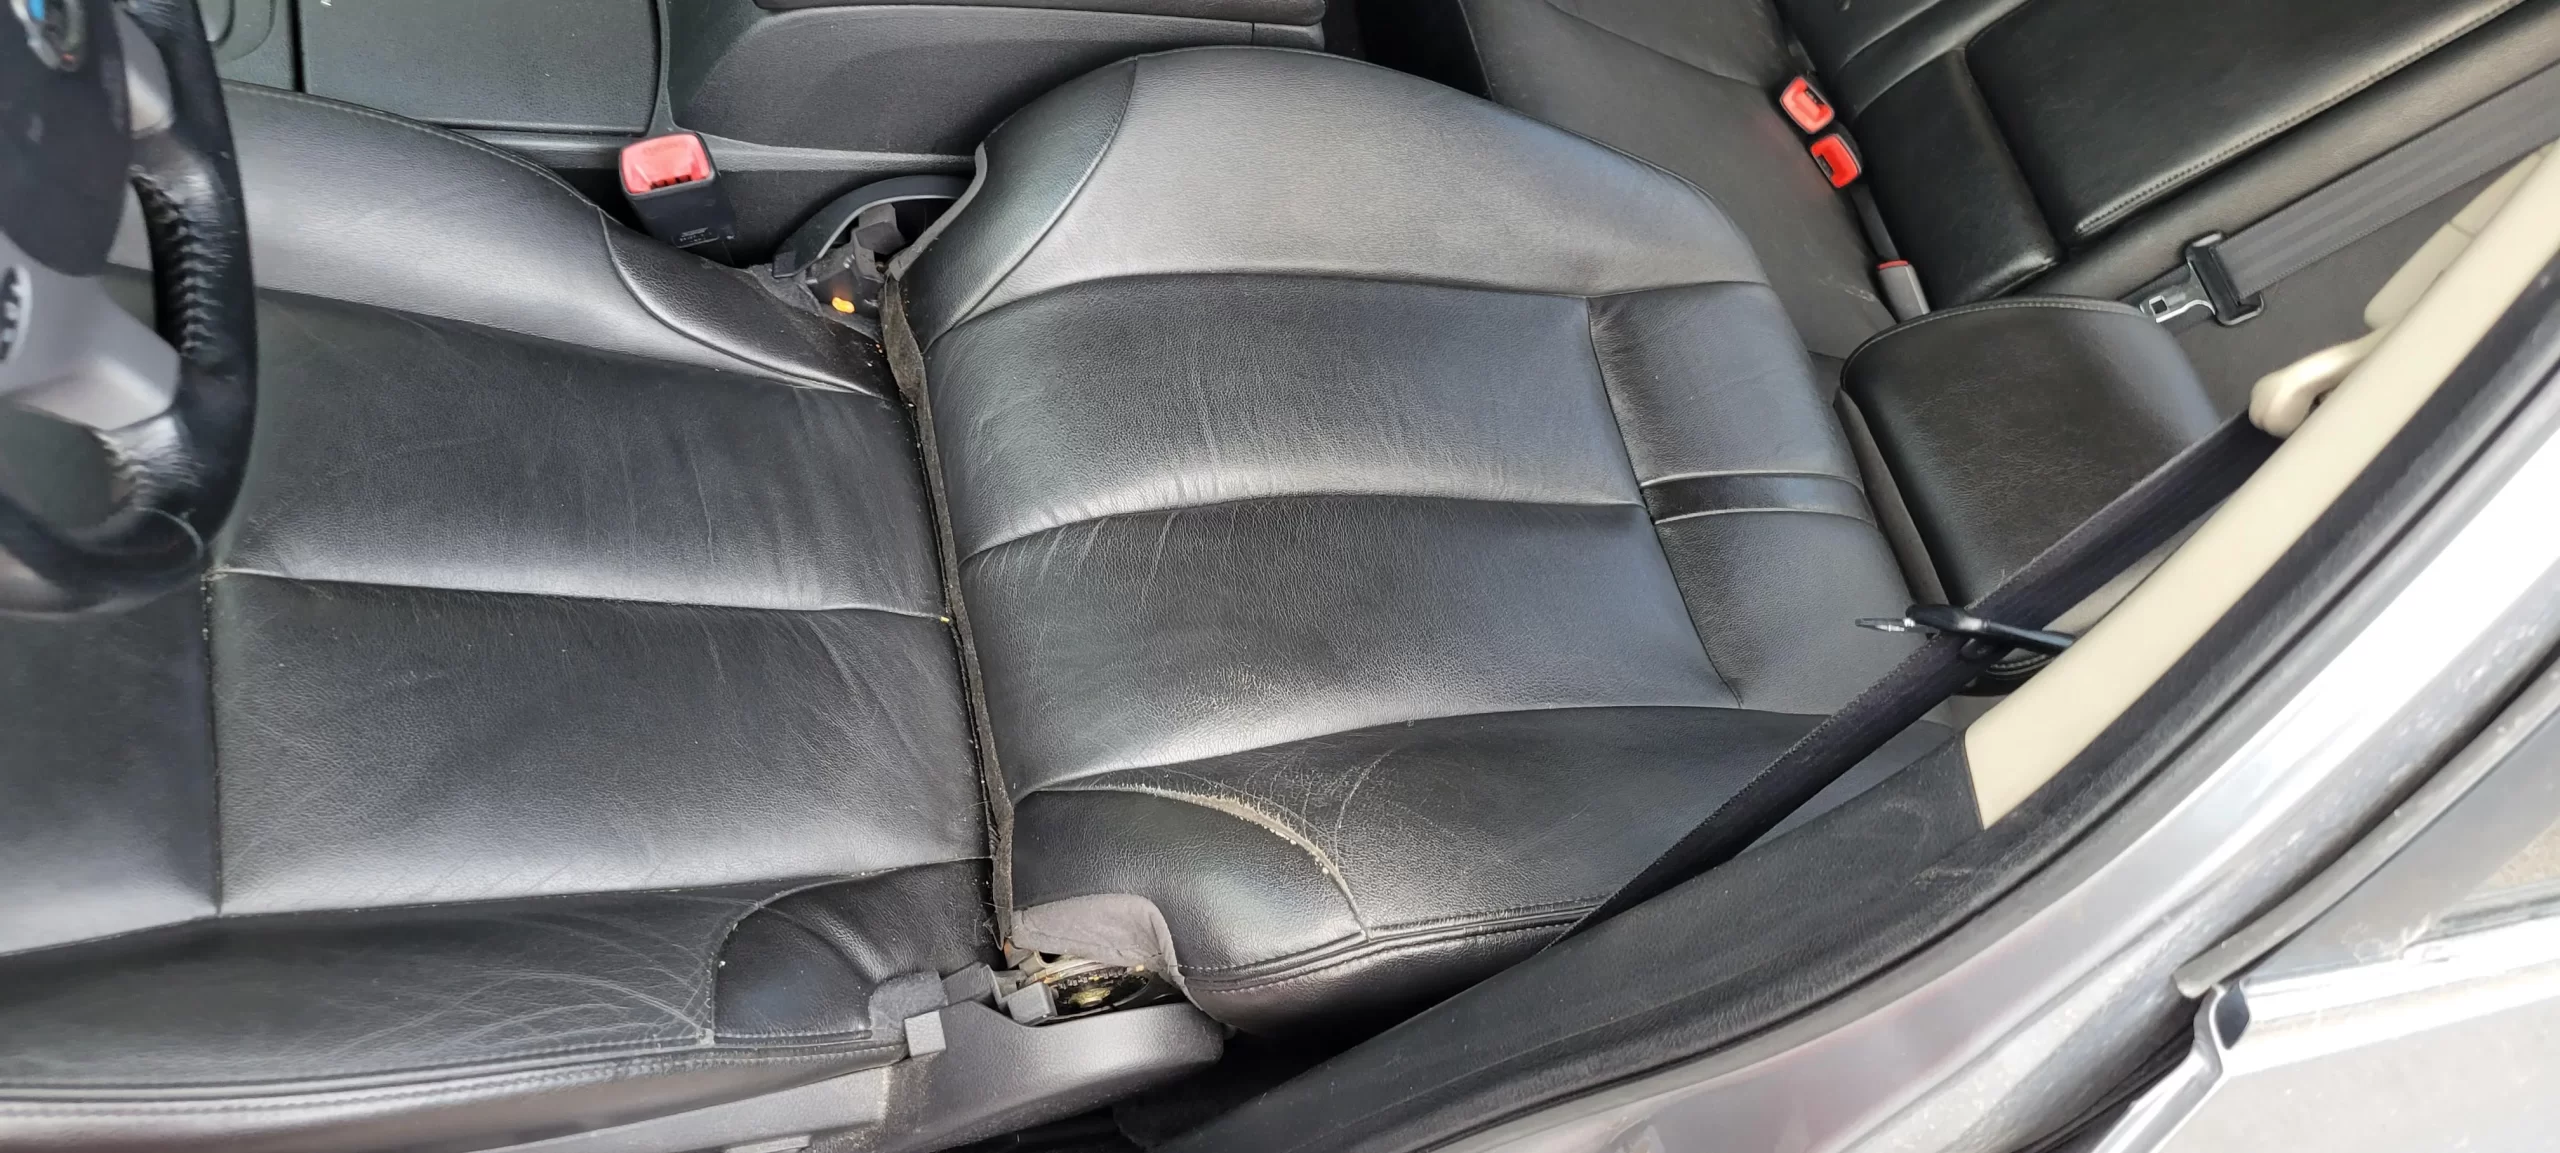 Why Does My Power Seat Stuck In Recline & What Can I Do About It?